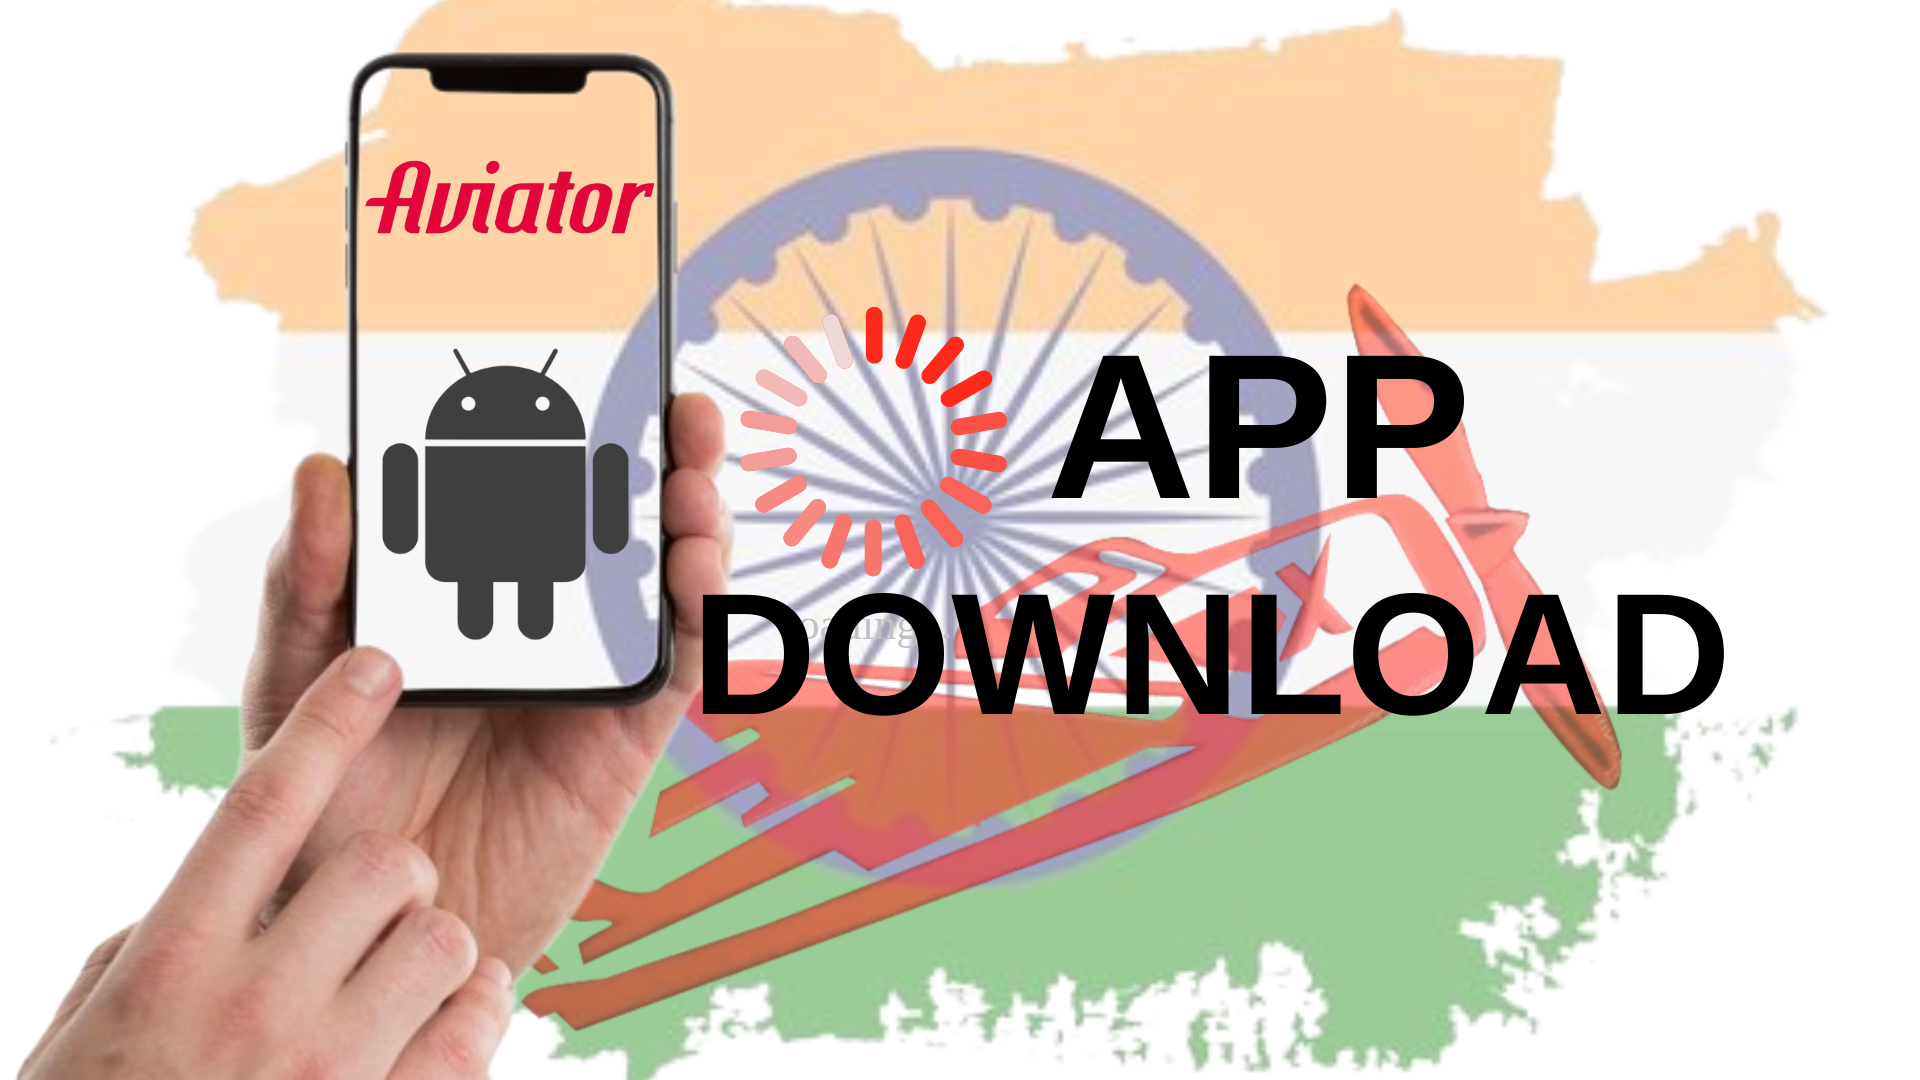 A hand holding a phone with the words aviator app downloaded on it android logo and plane
